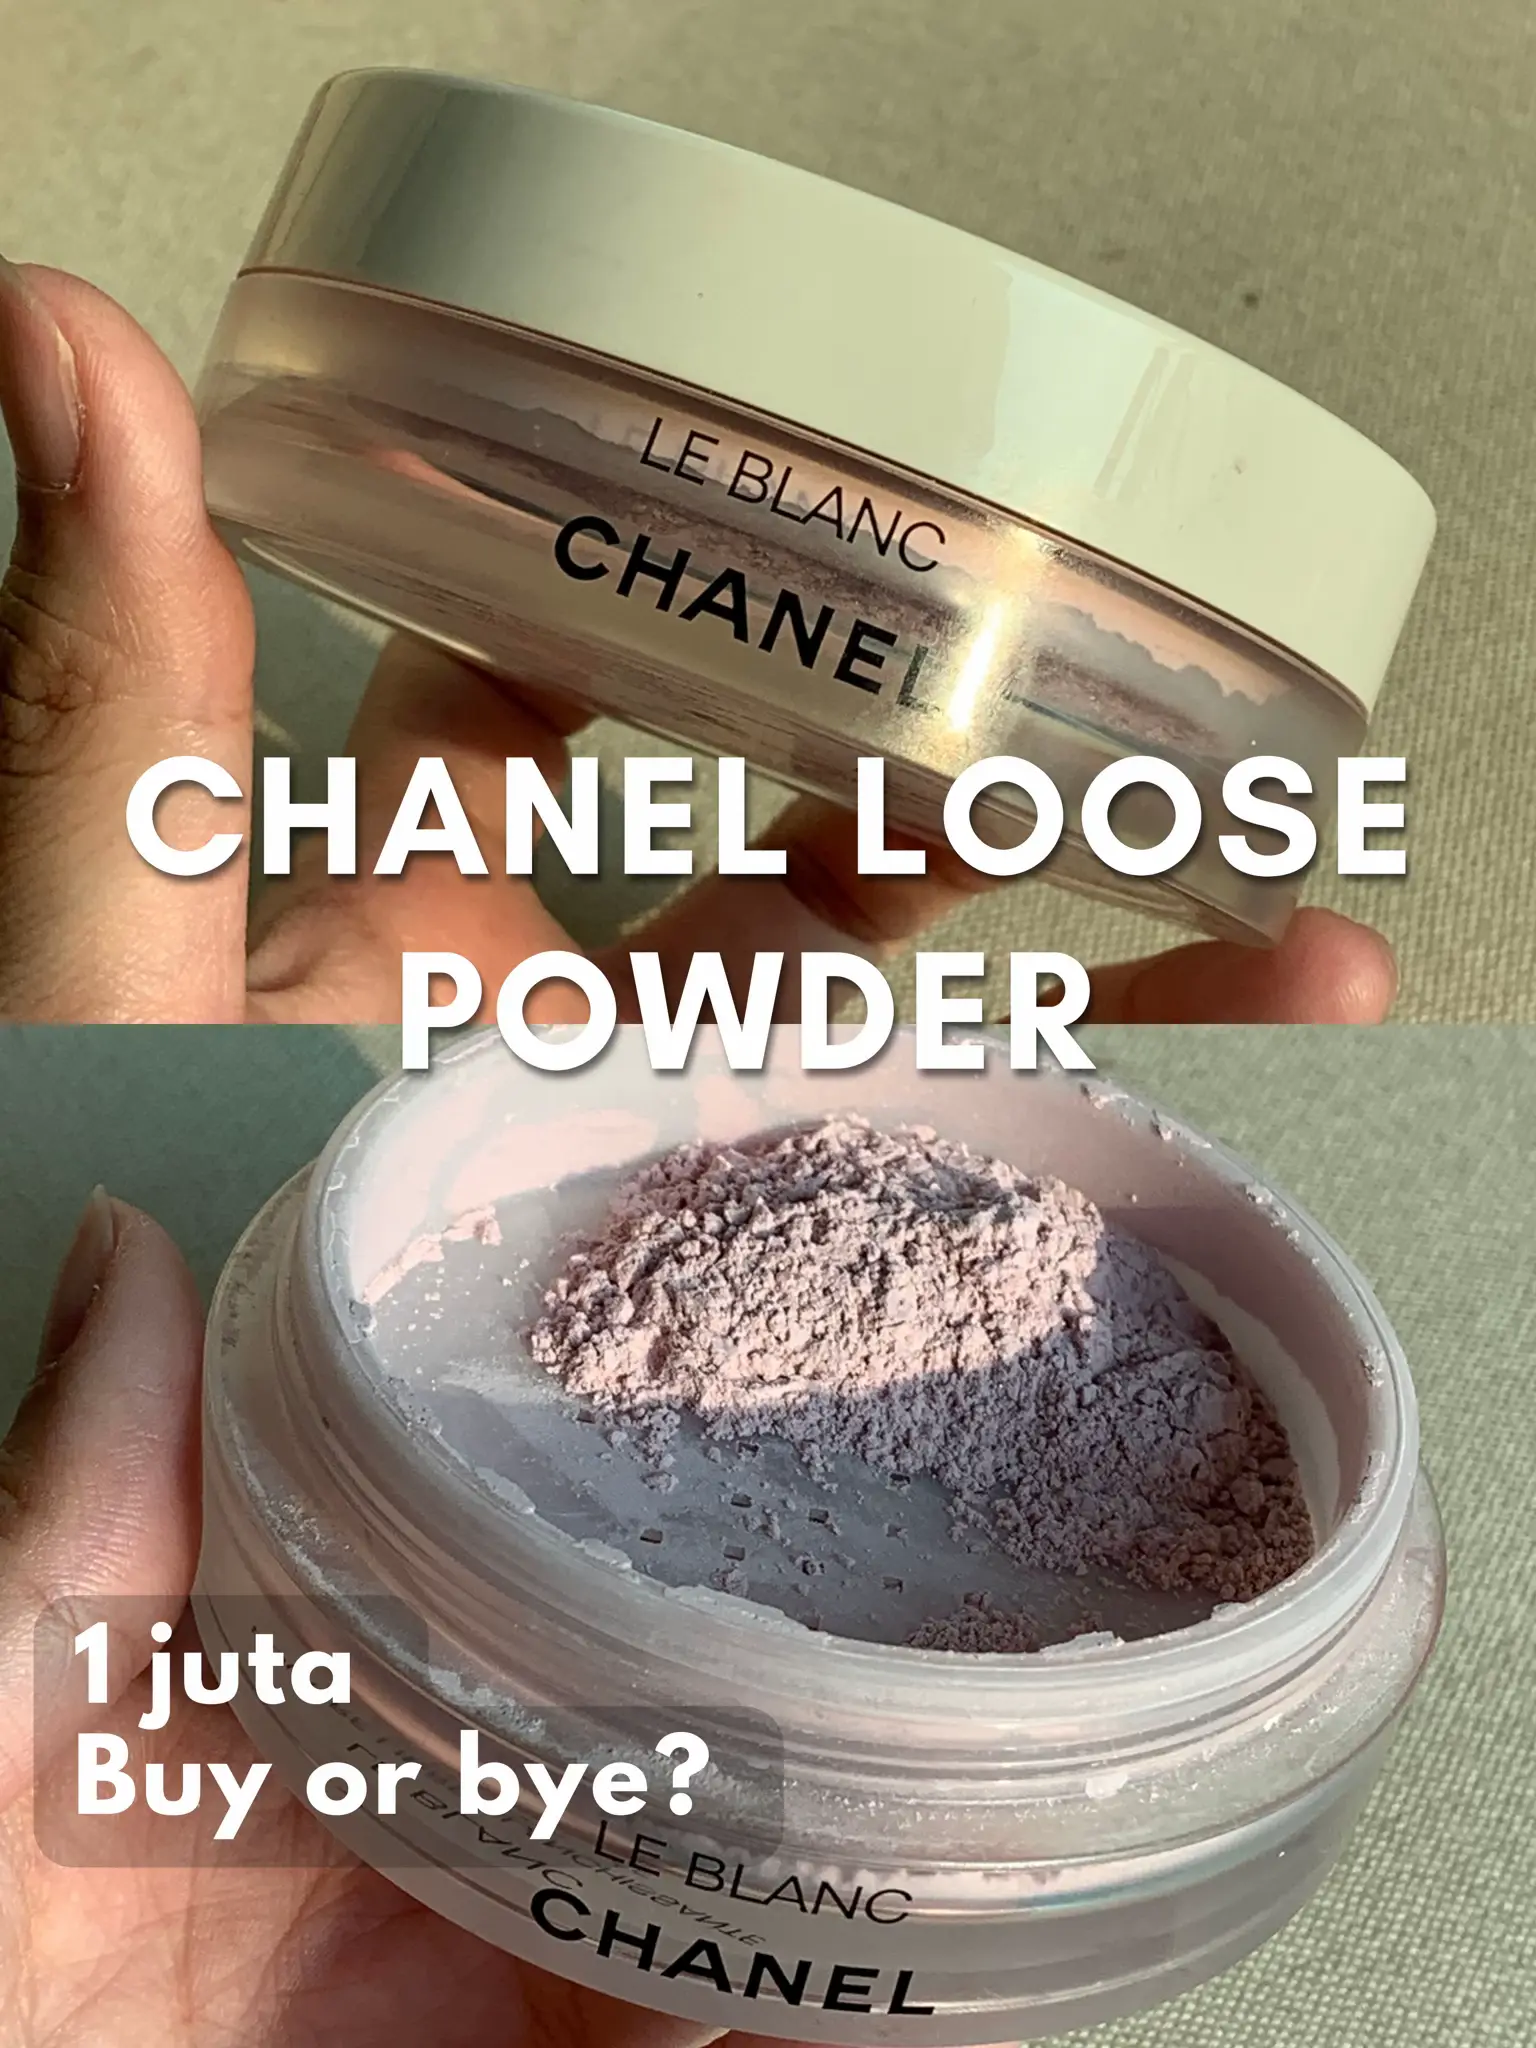 CHANEL LE BLANC LOSE POWDER, Gallery posted by Jeqaf✨